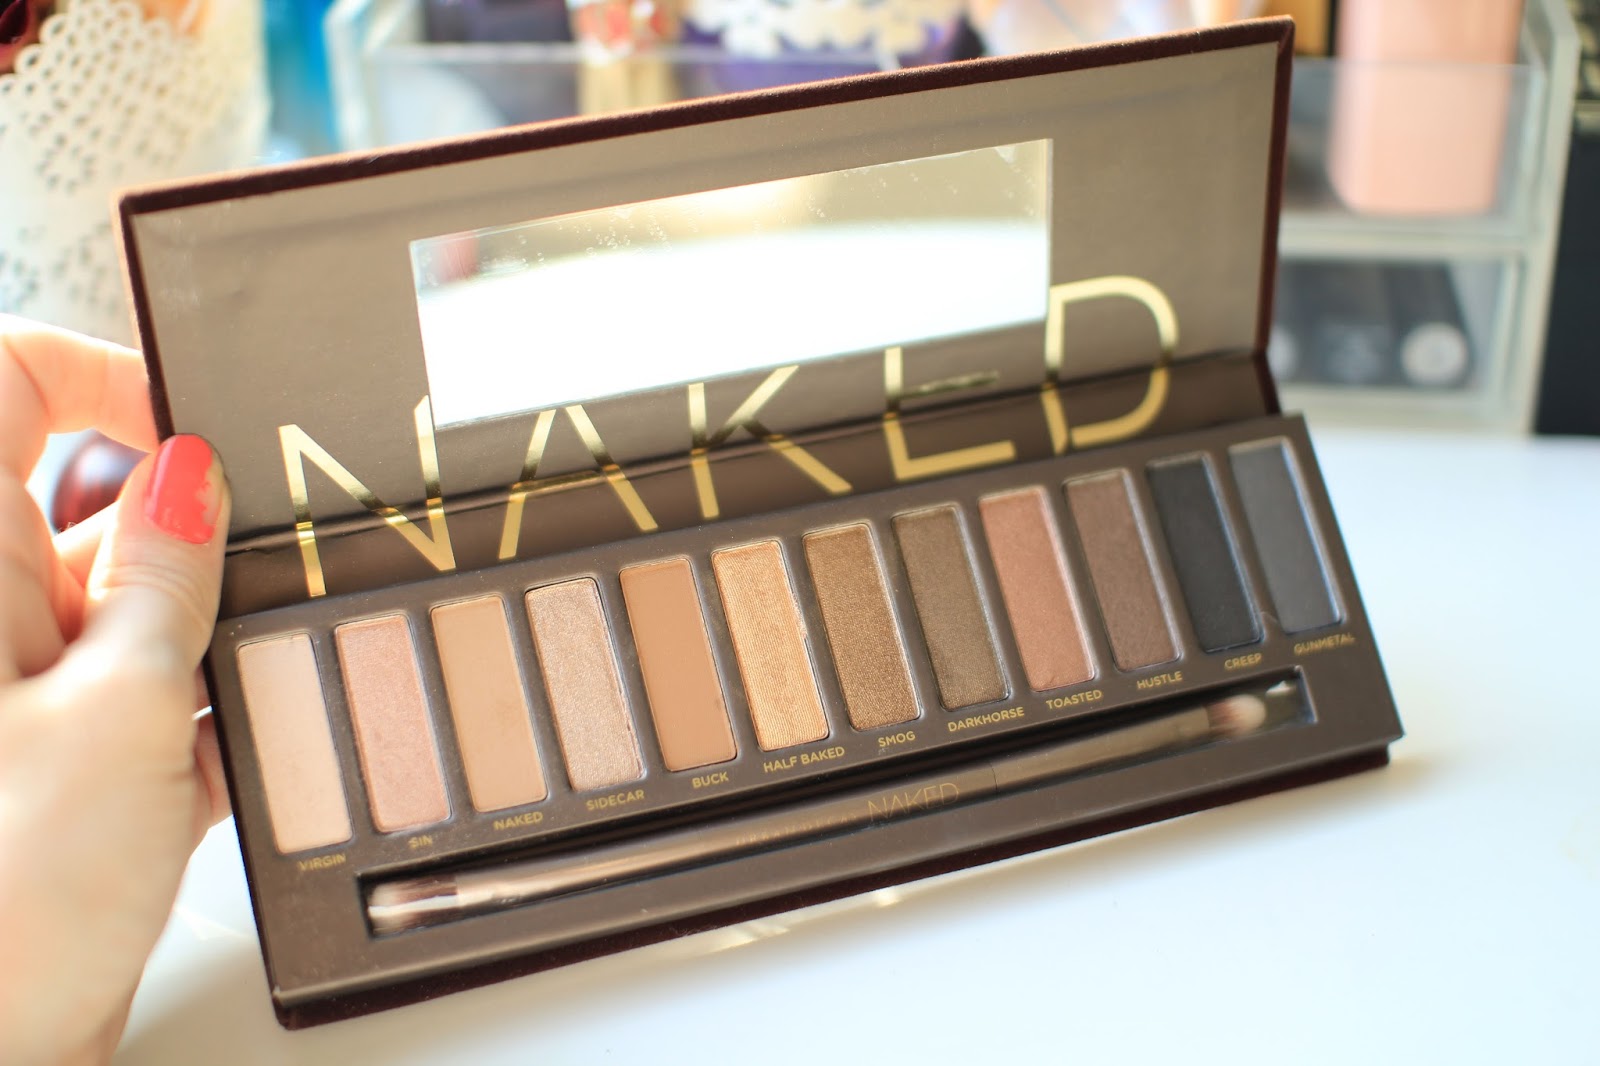 Urban Decay Launching New Naked Reloaded Palette 